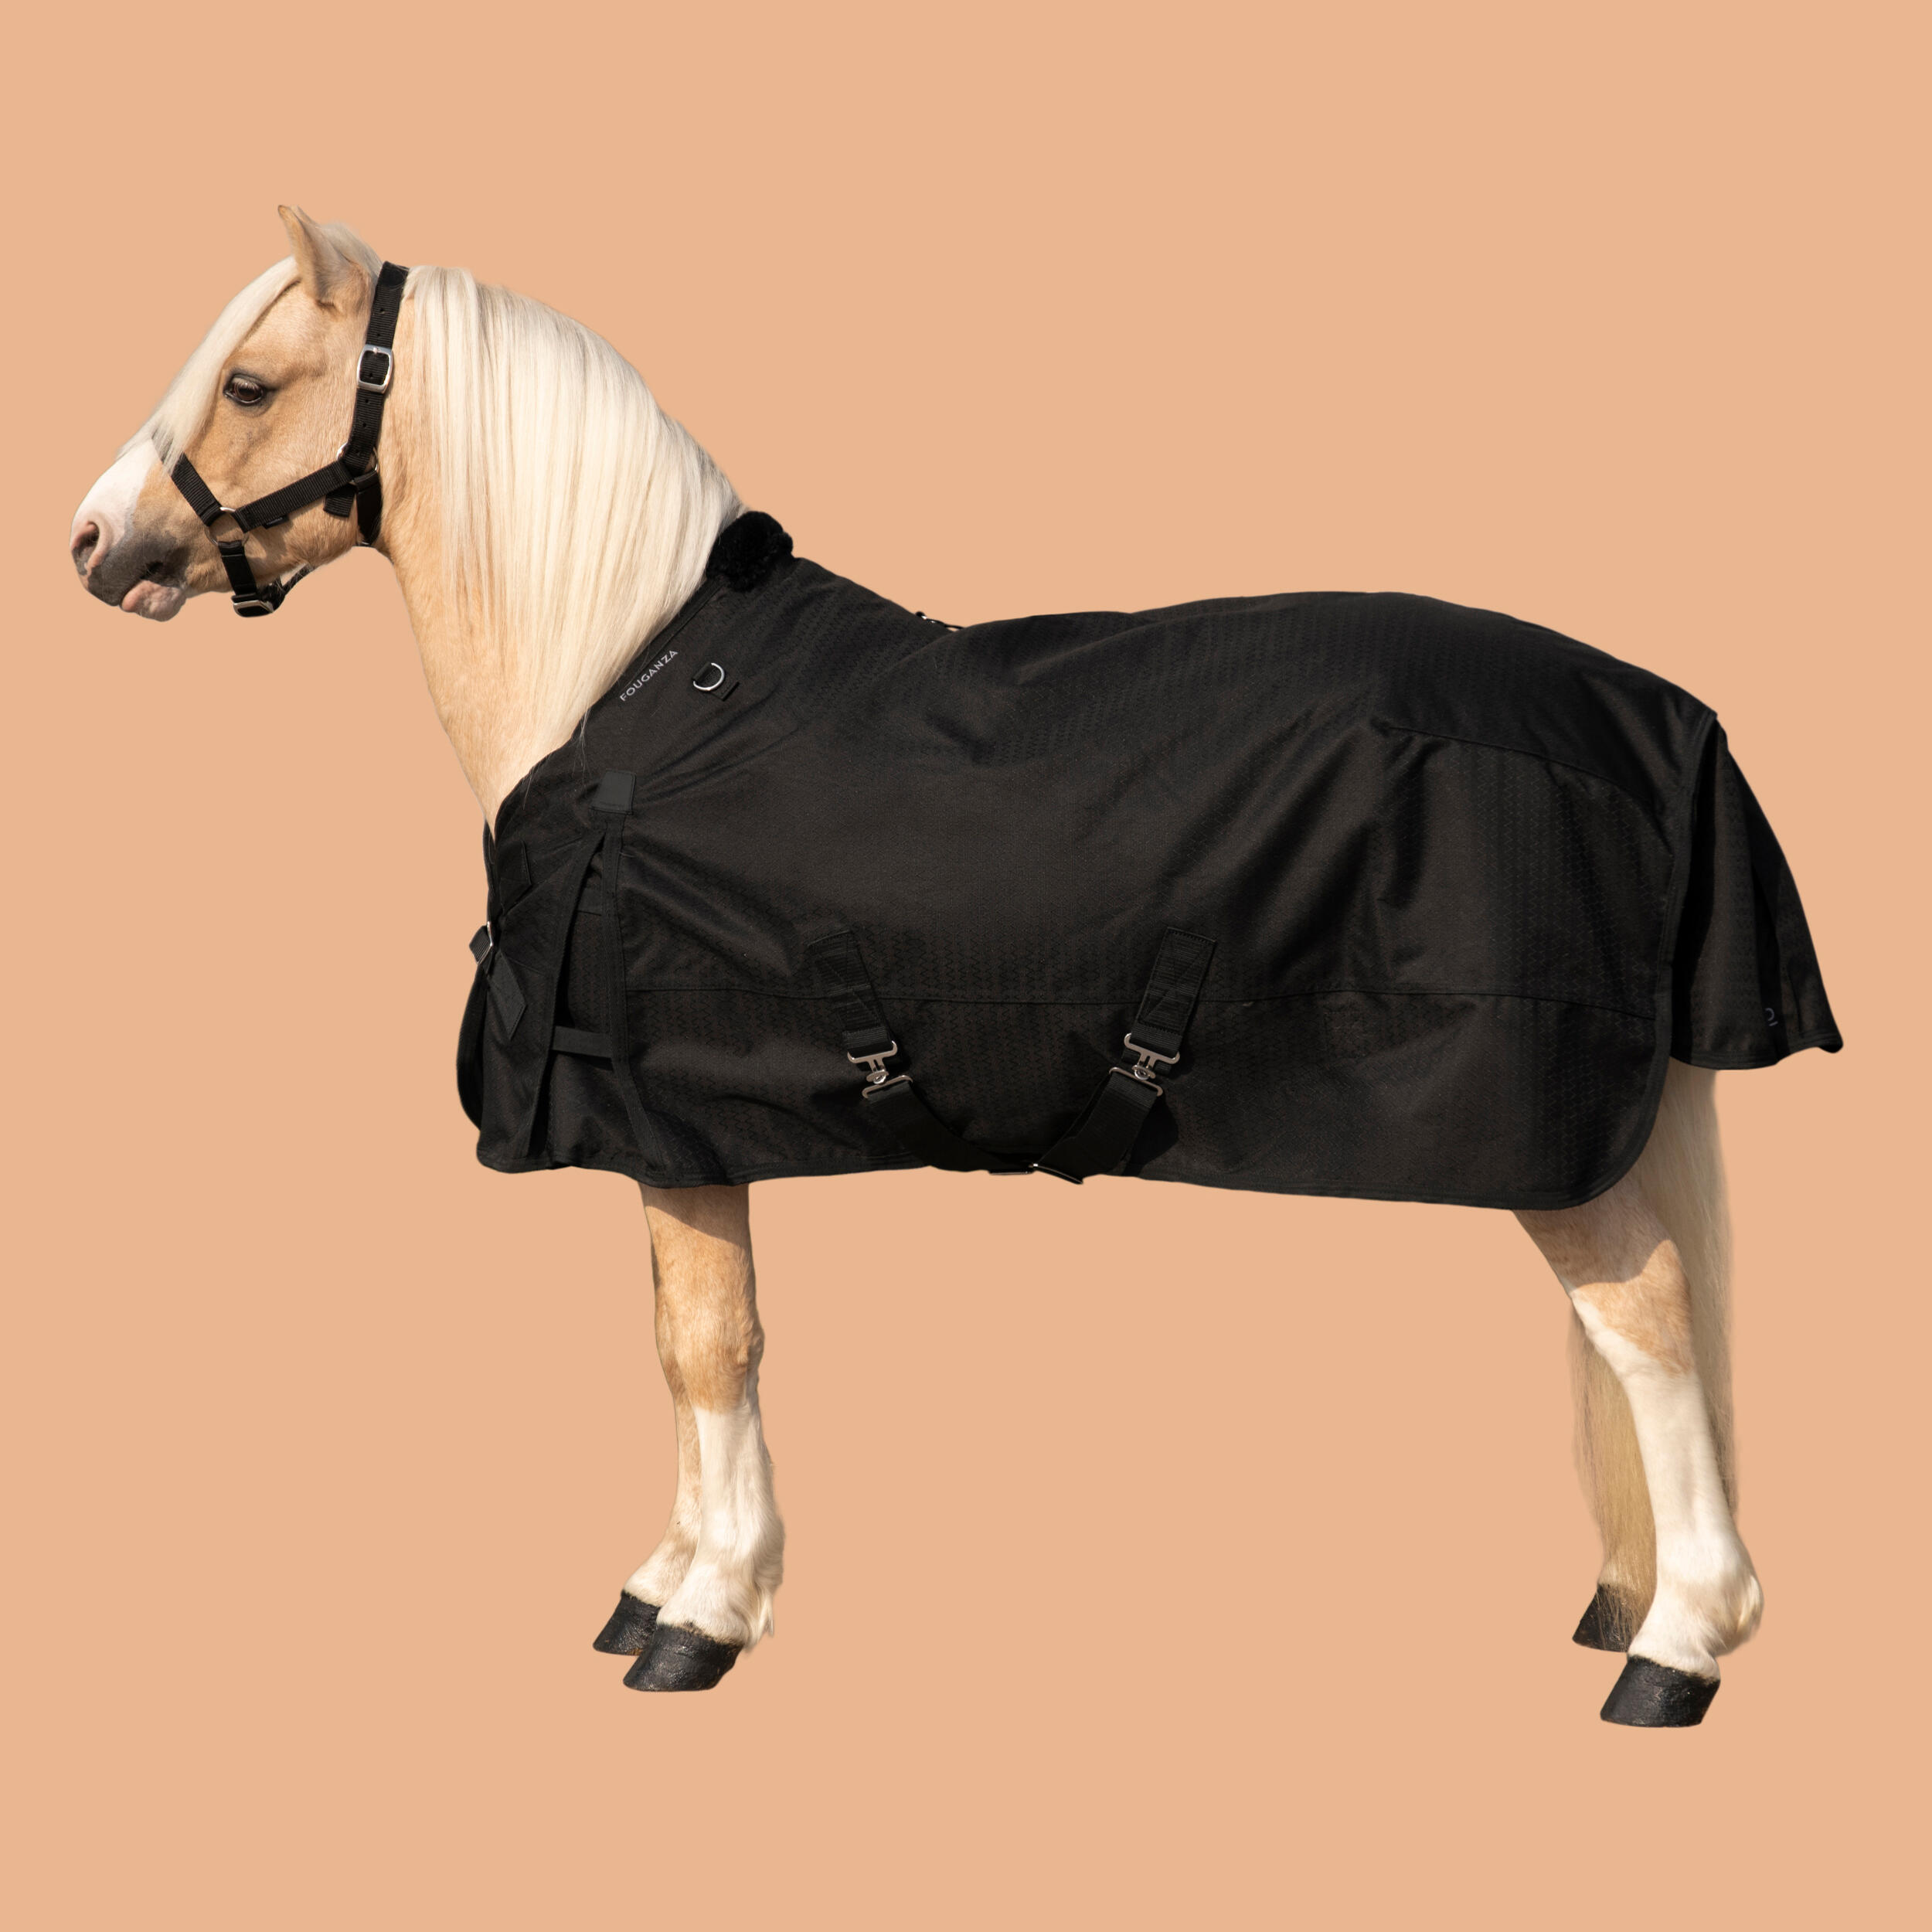 Horse Riding Waterproof Rug 1000D for Horse and Pony Allweather 200g 12/13